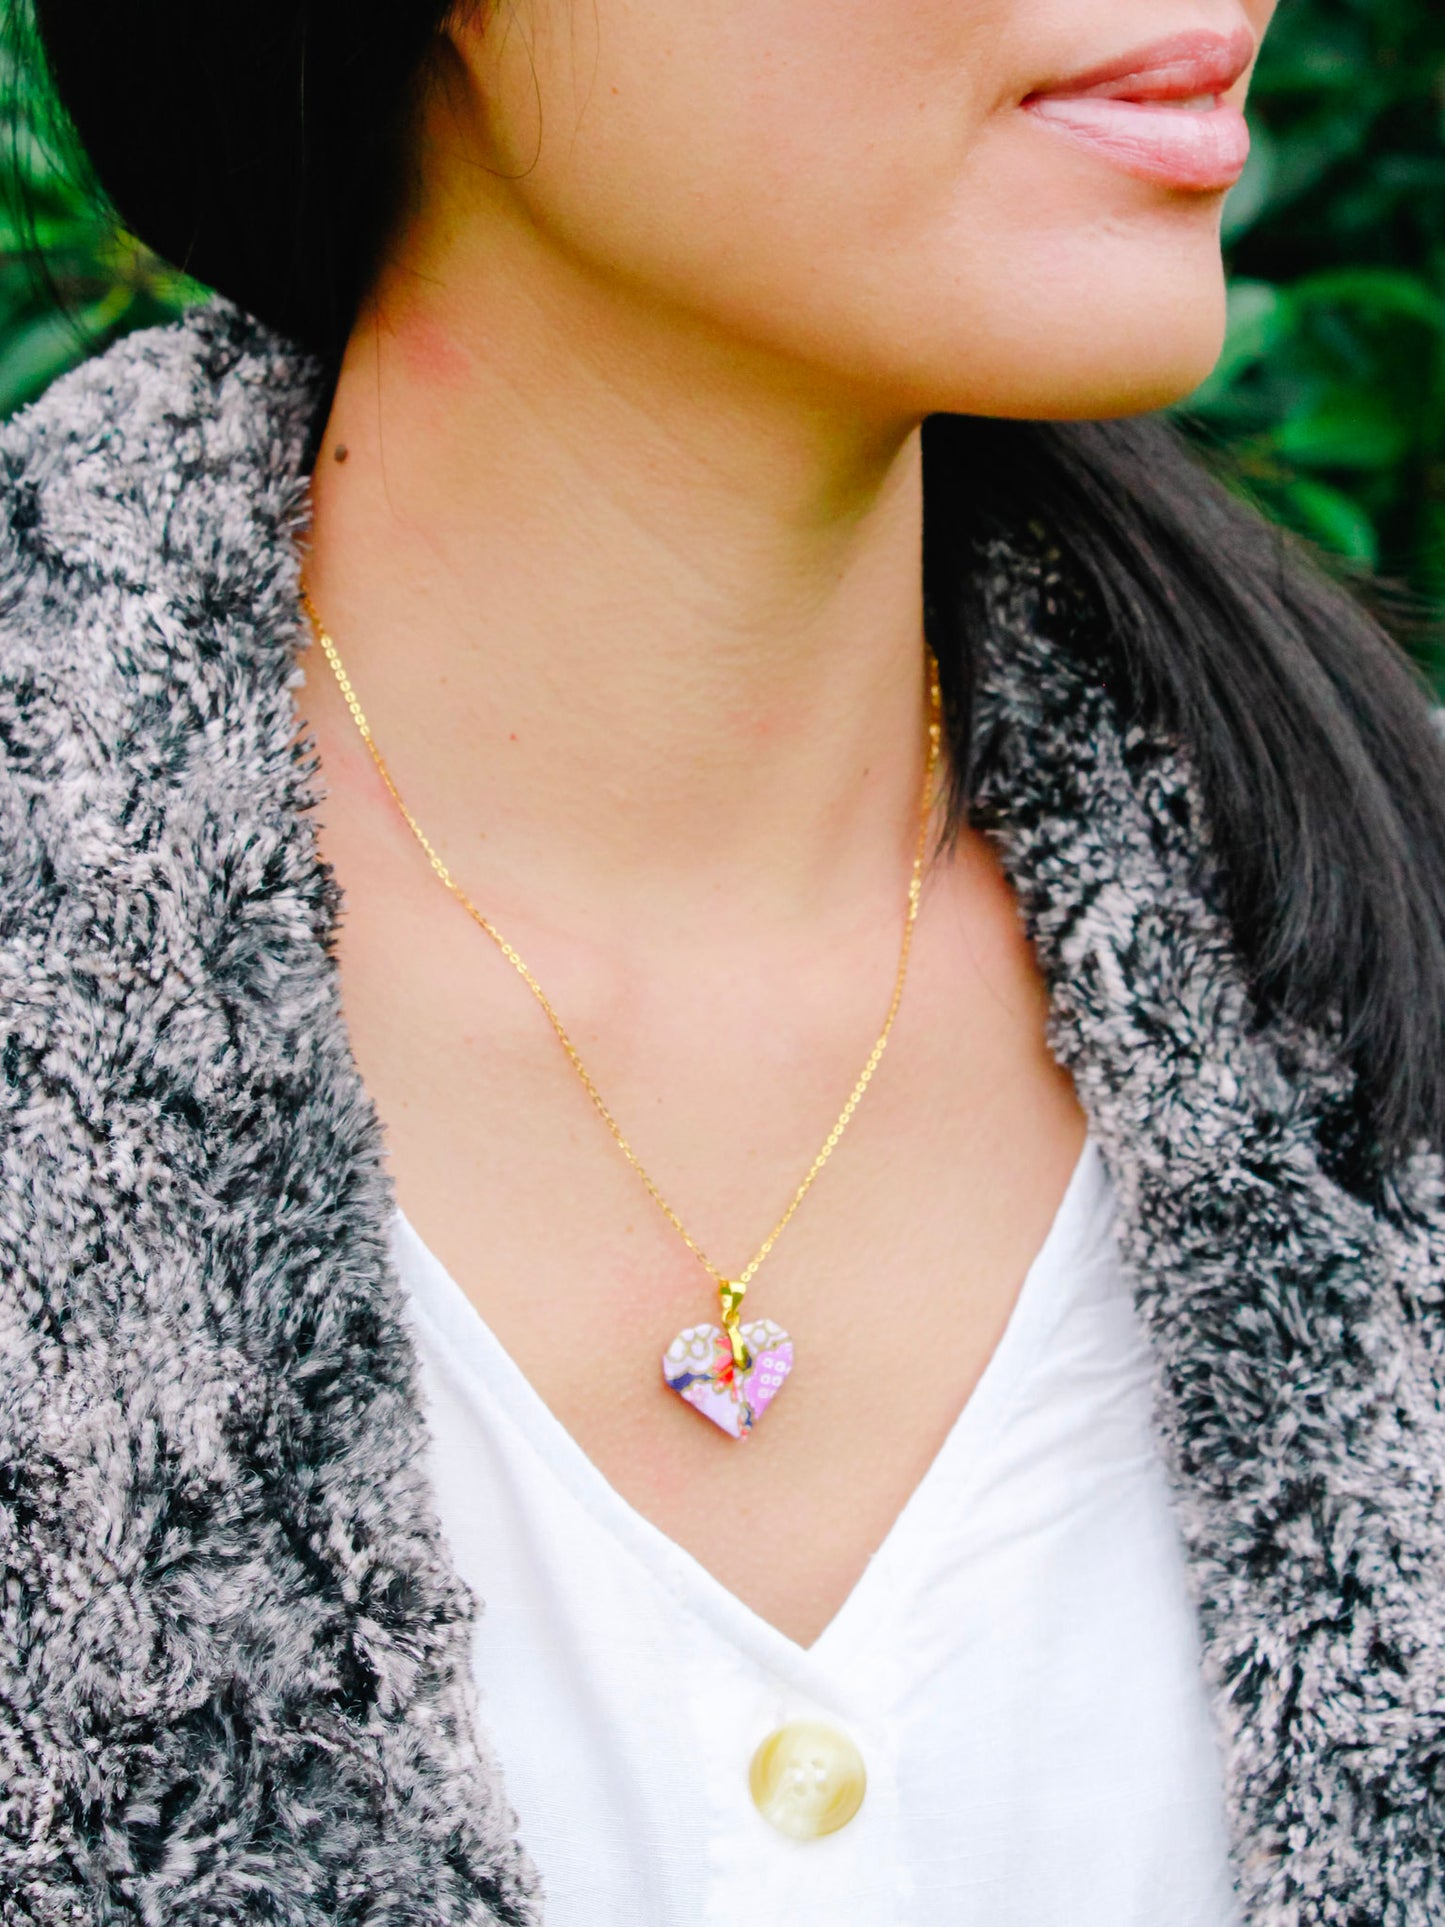 Origami Necklace - Love Heart